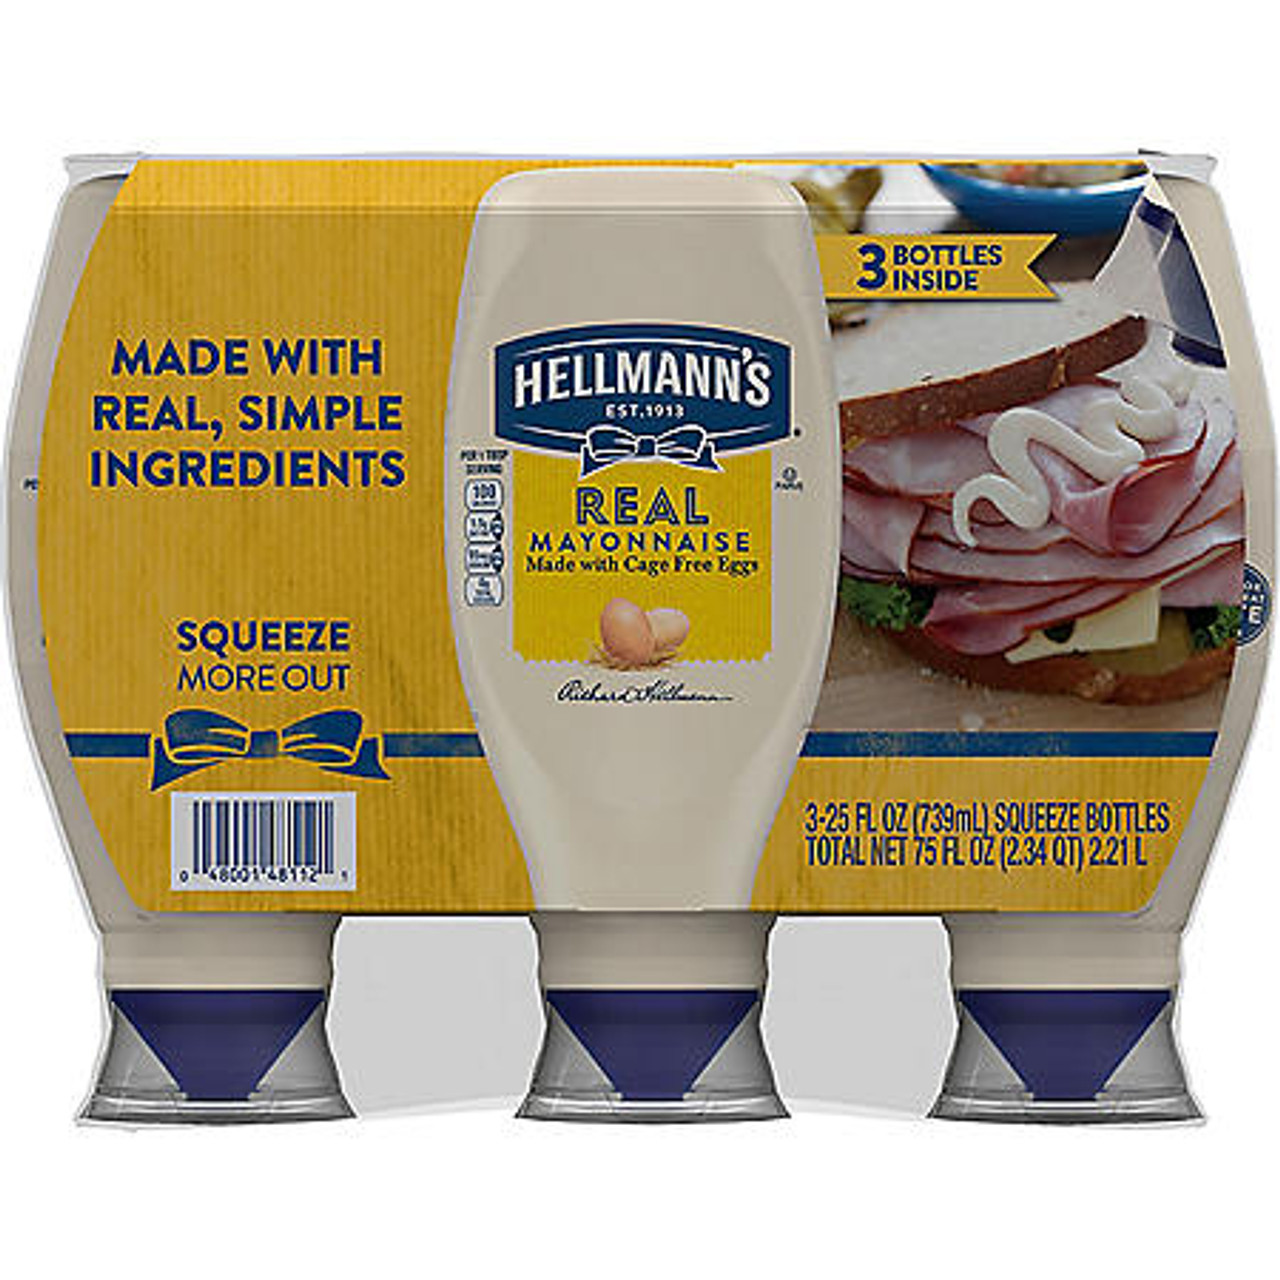 Hellmann's Real Mayonnaise (25 oz., 3 pk.) - *In Store